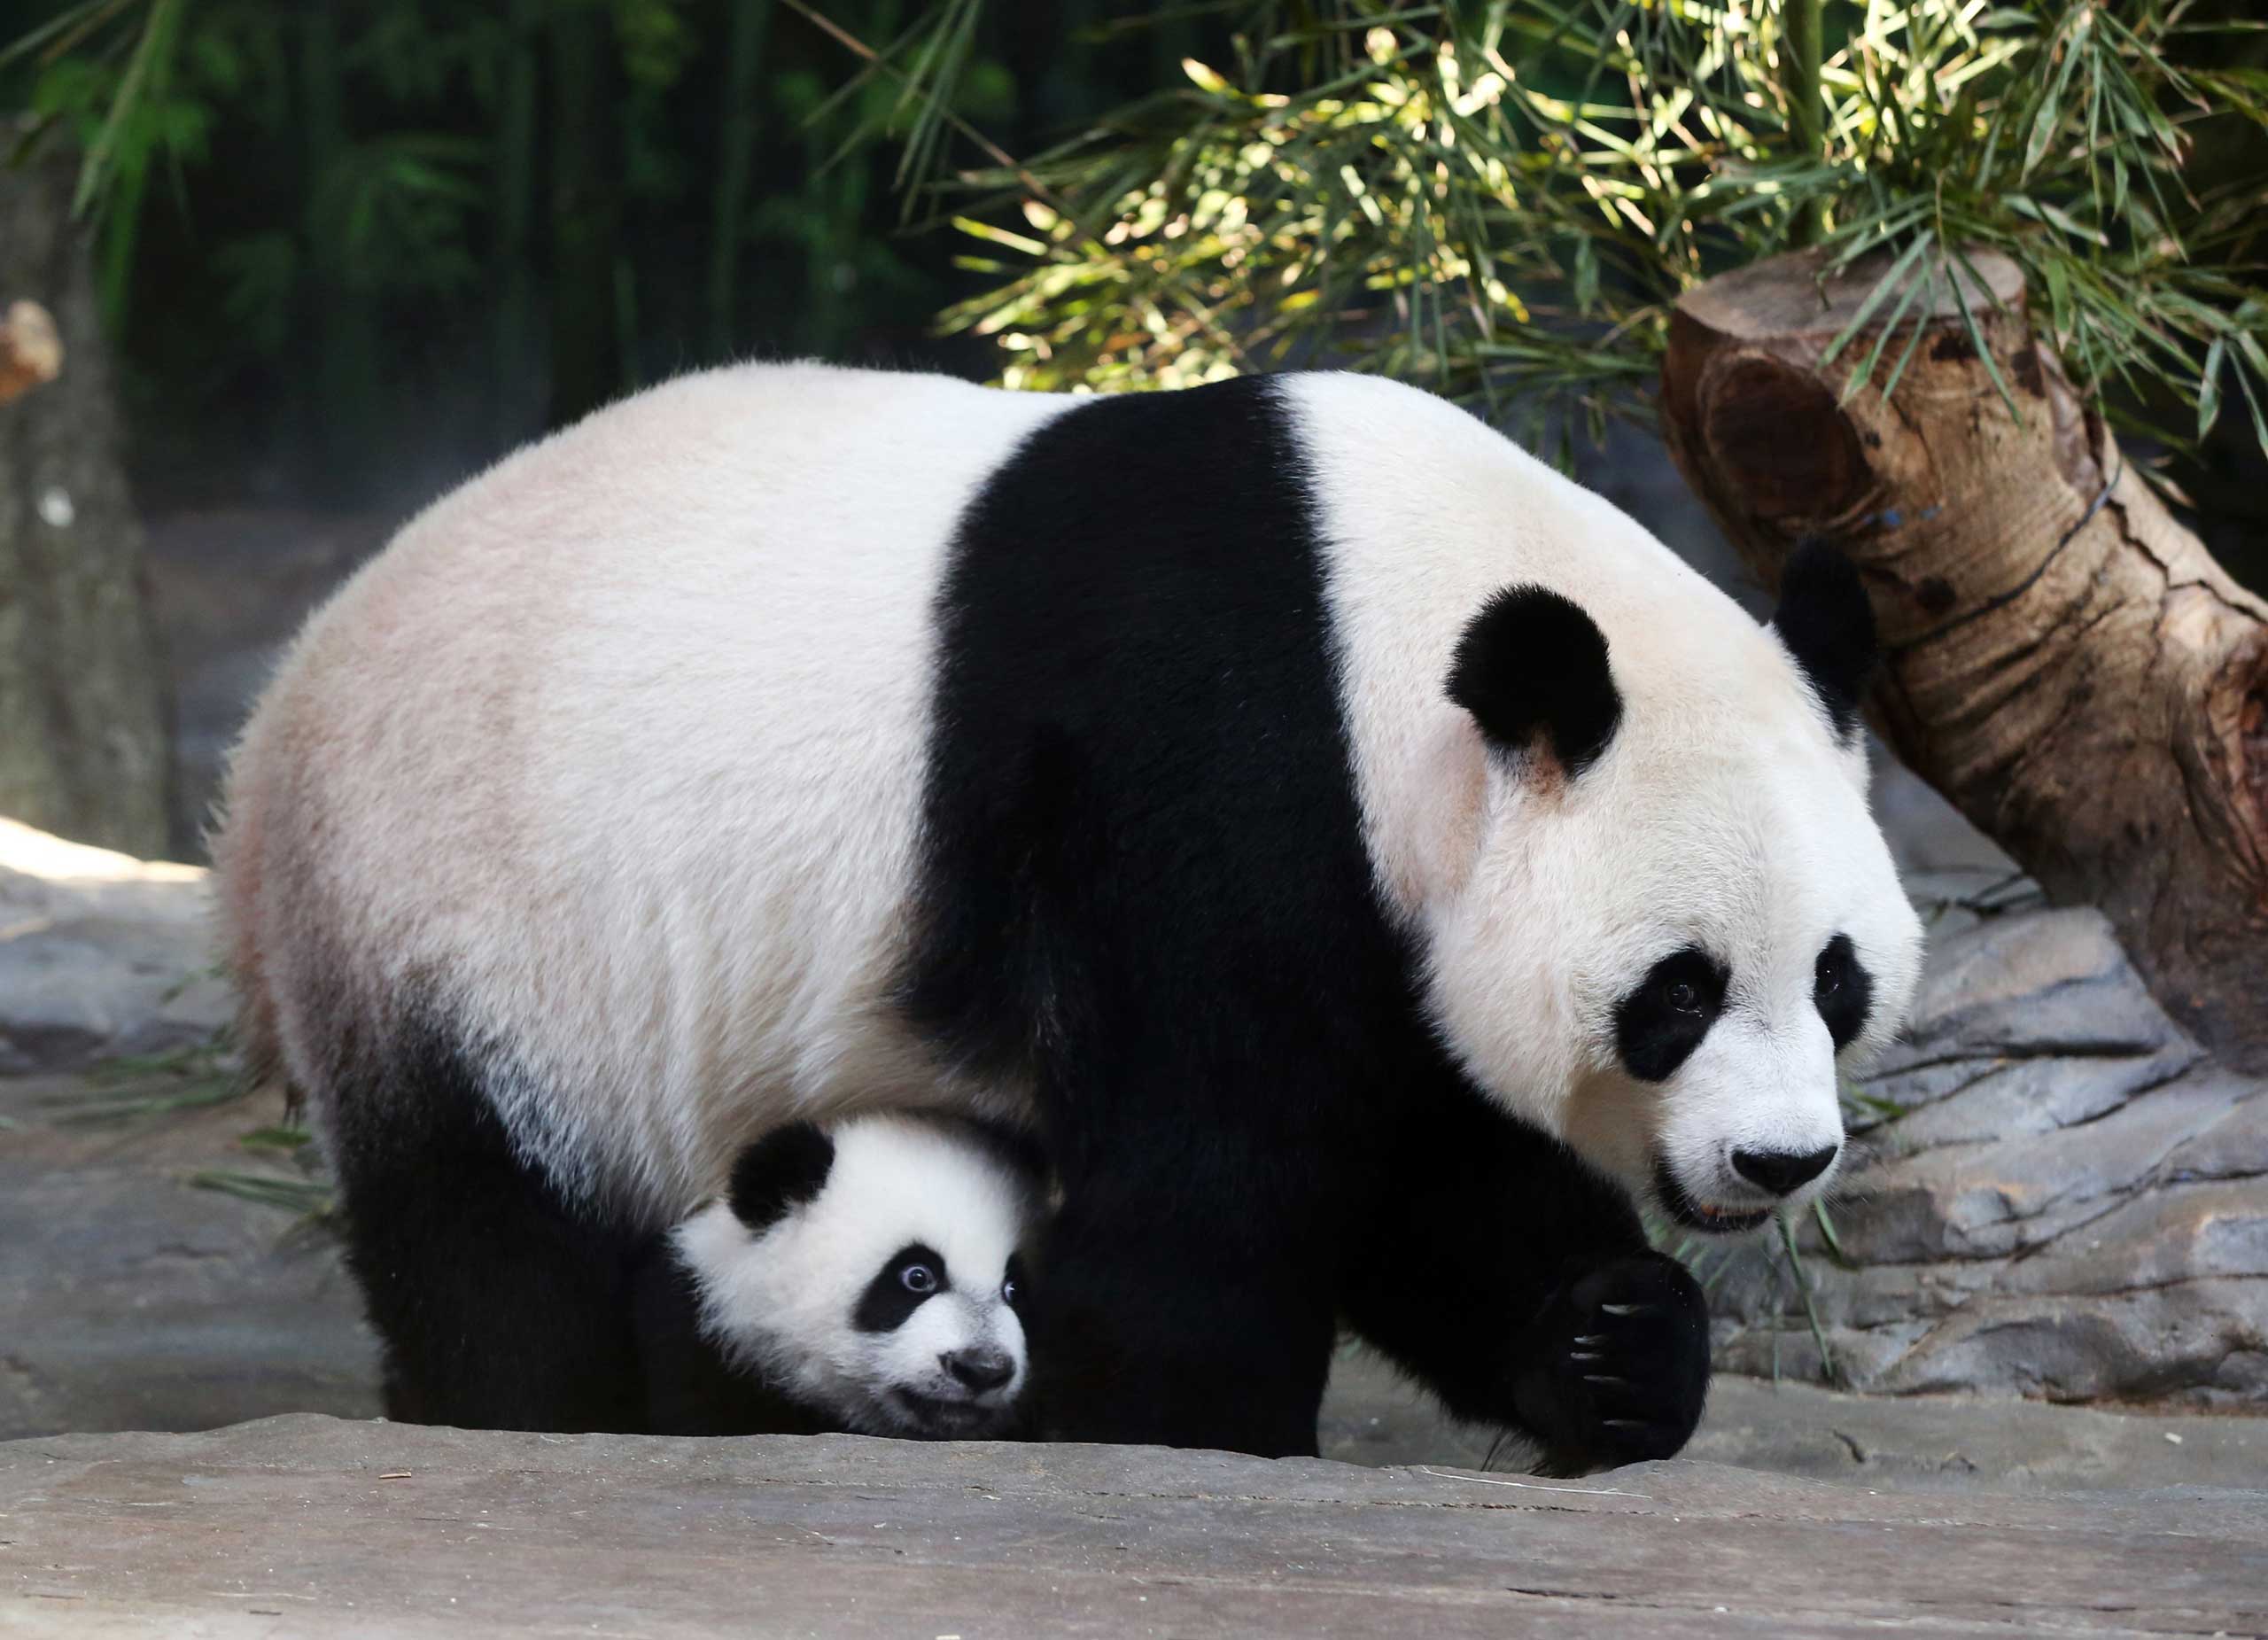 Mother giant panda Juxiao is seen with one of her triplets at Chimelong Safari Park in Guangzhou, Guangdong province, Dec. 9, 2014. (Reuters)